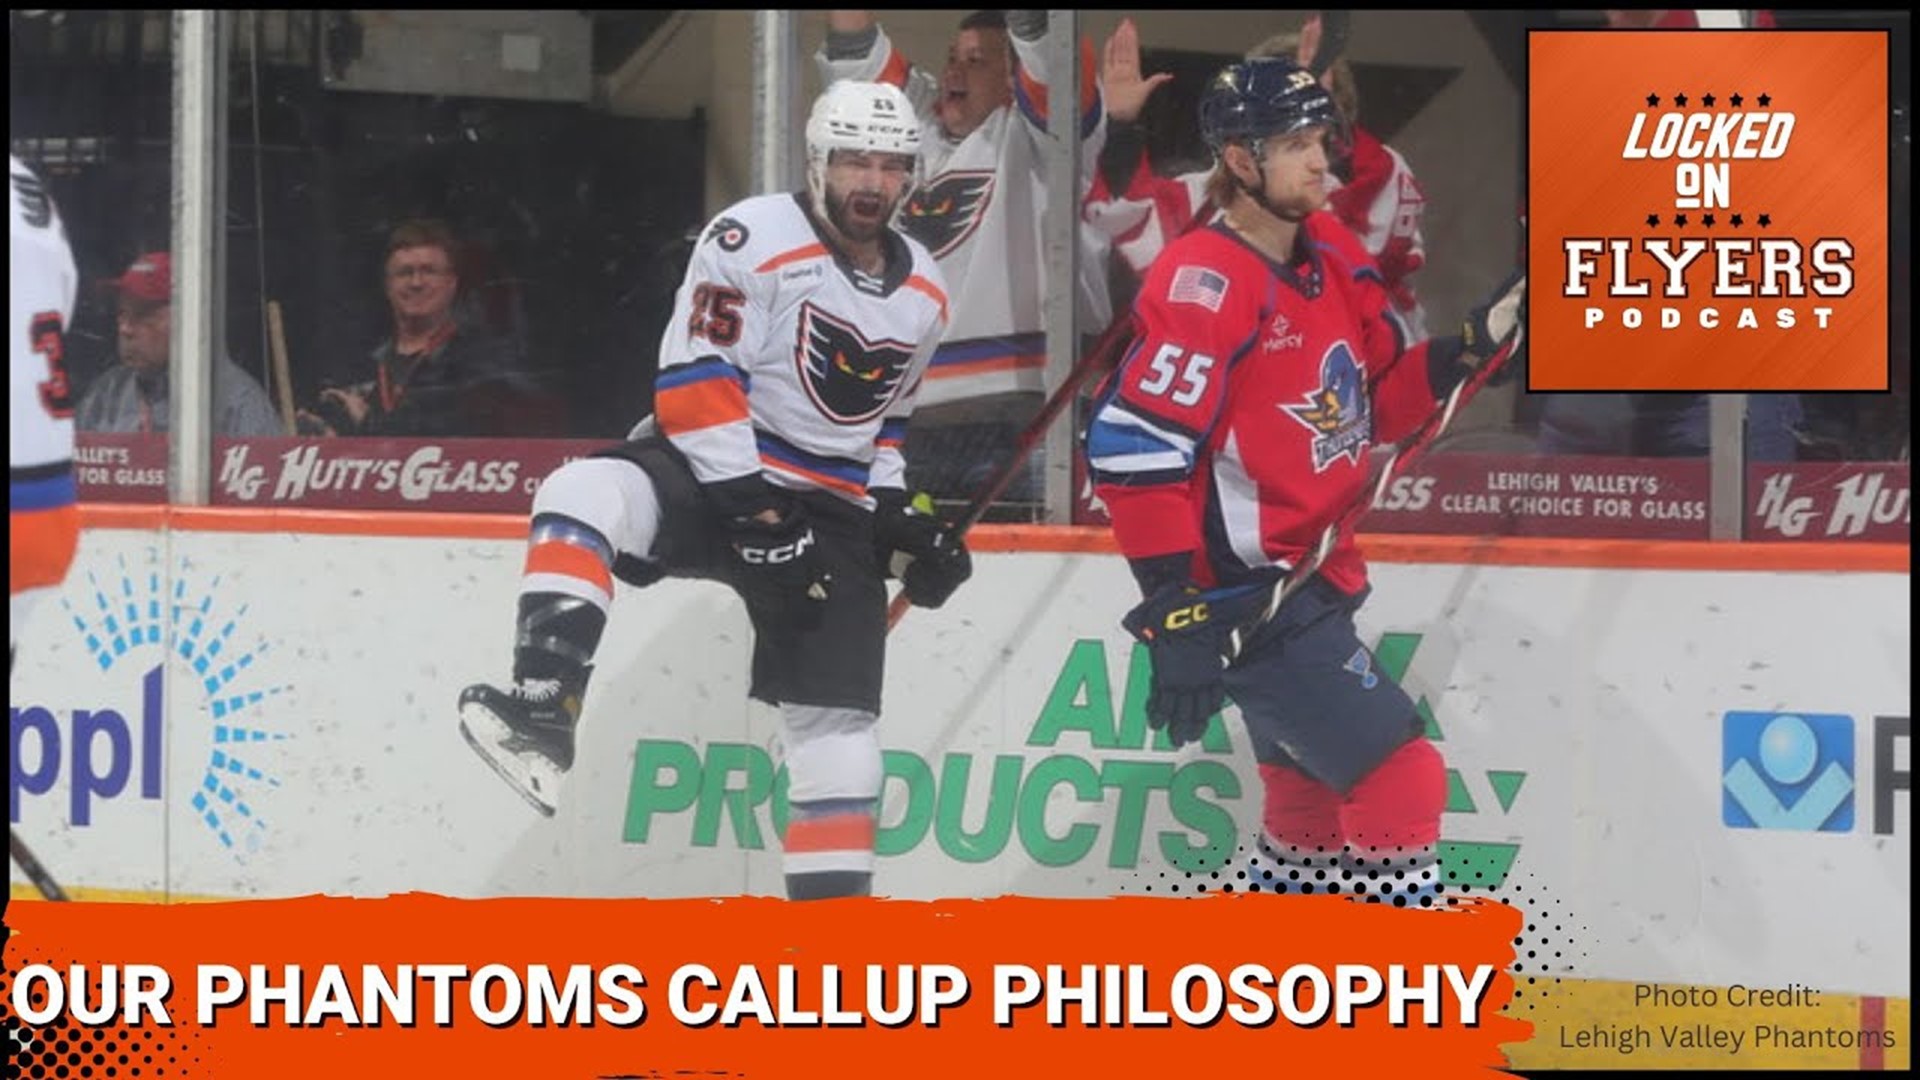 Russ & Rachel talk about the recall of Max Willman and demotion of Tanner Laczynski in the context of the Flyers callup philosophy and strategy.